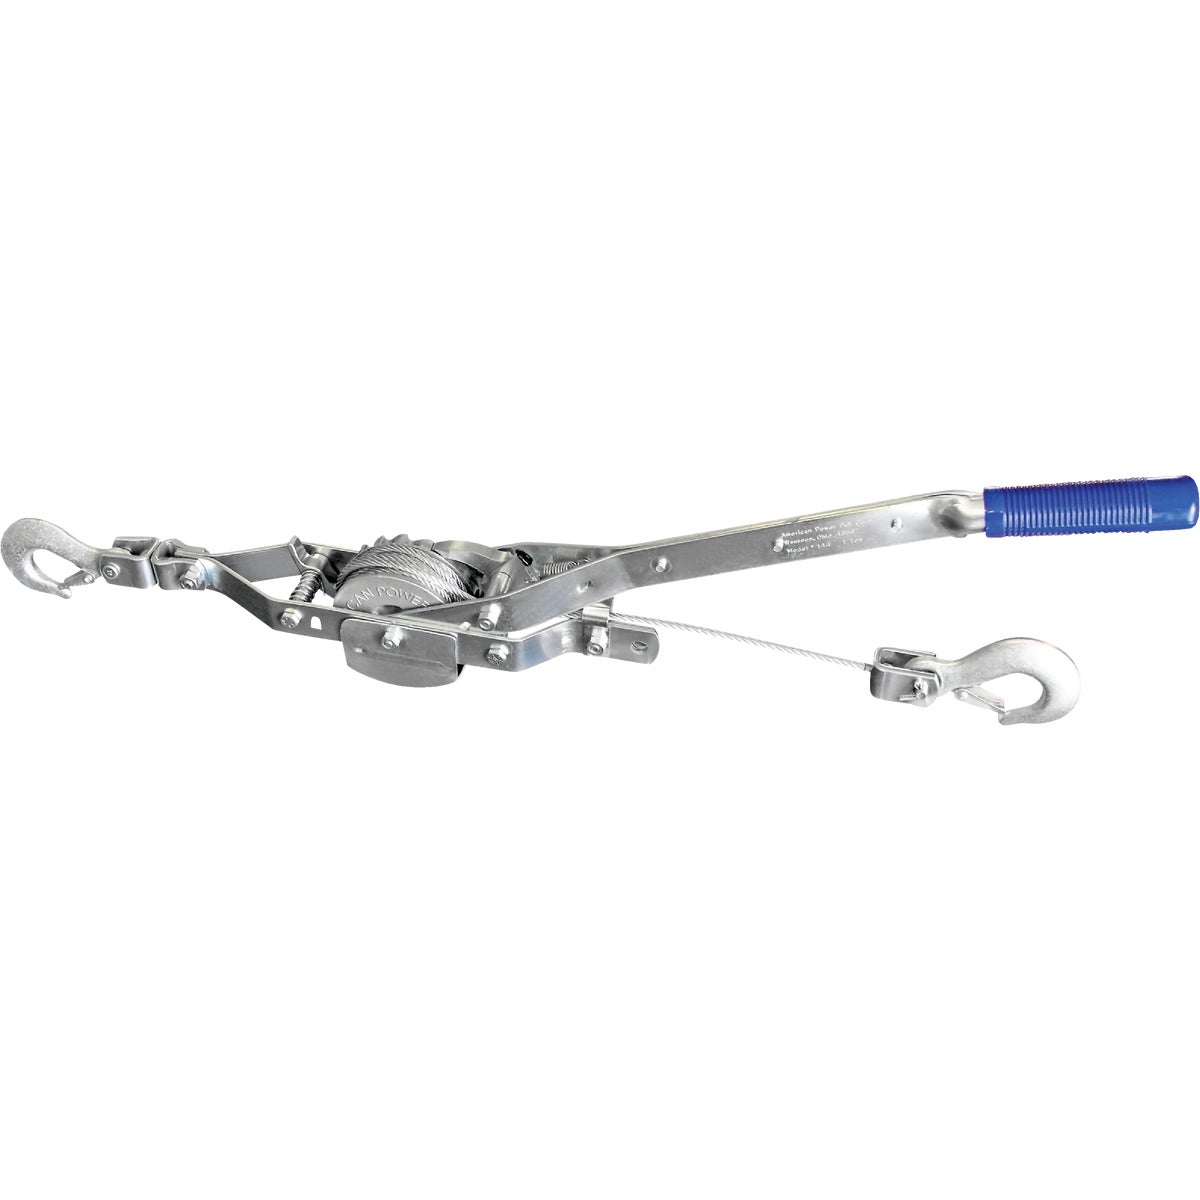 Item 760885, Professional cable puller.